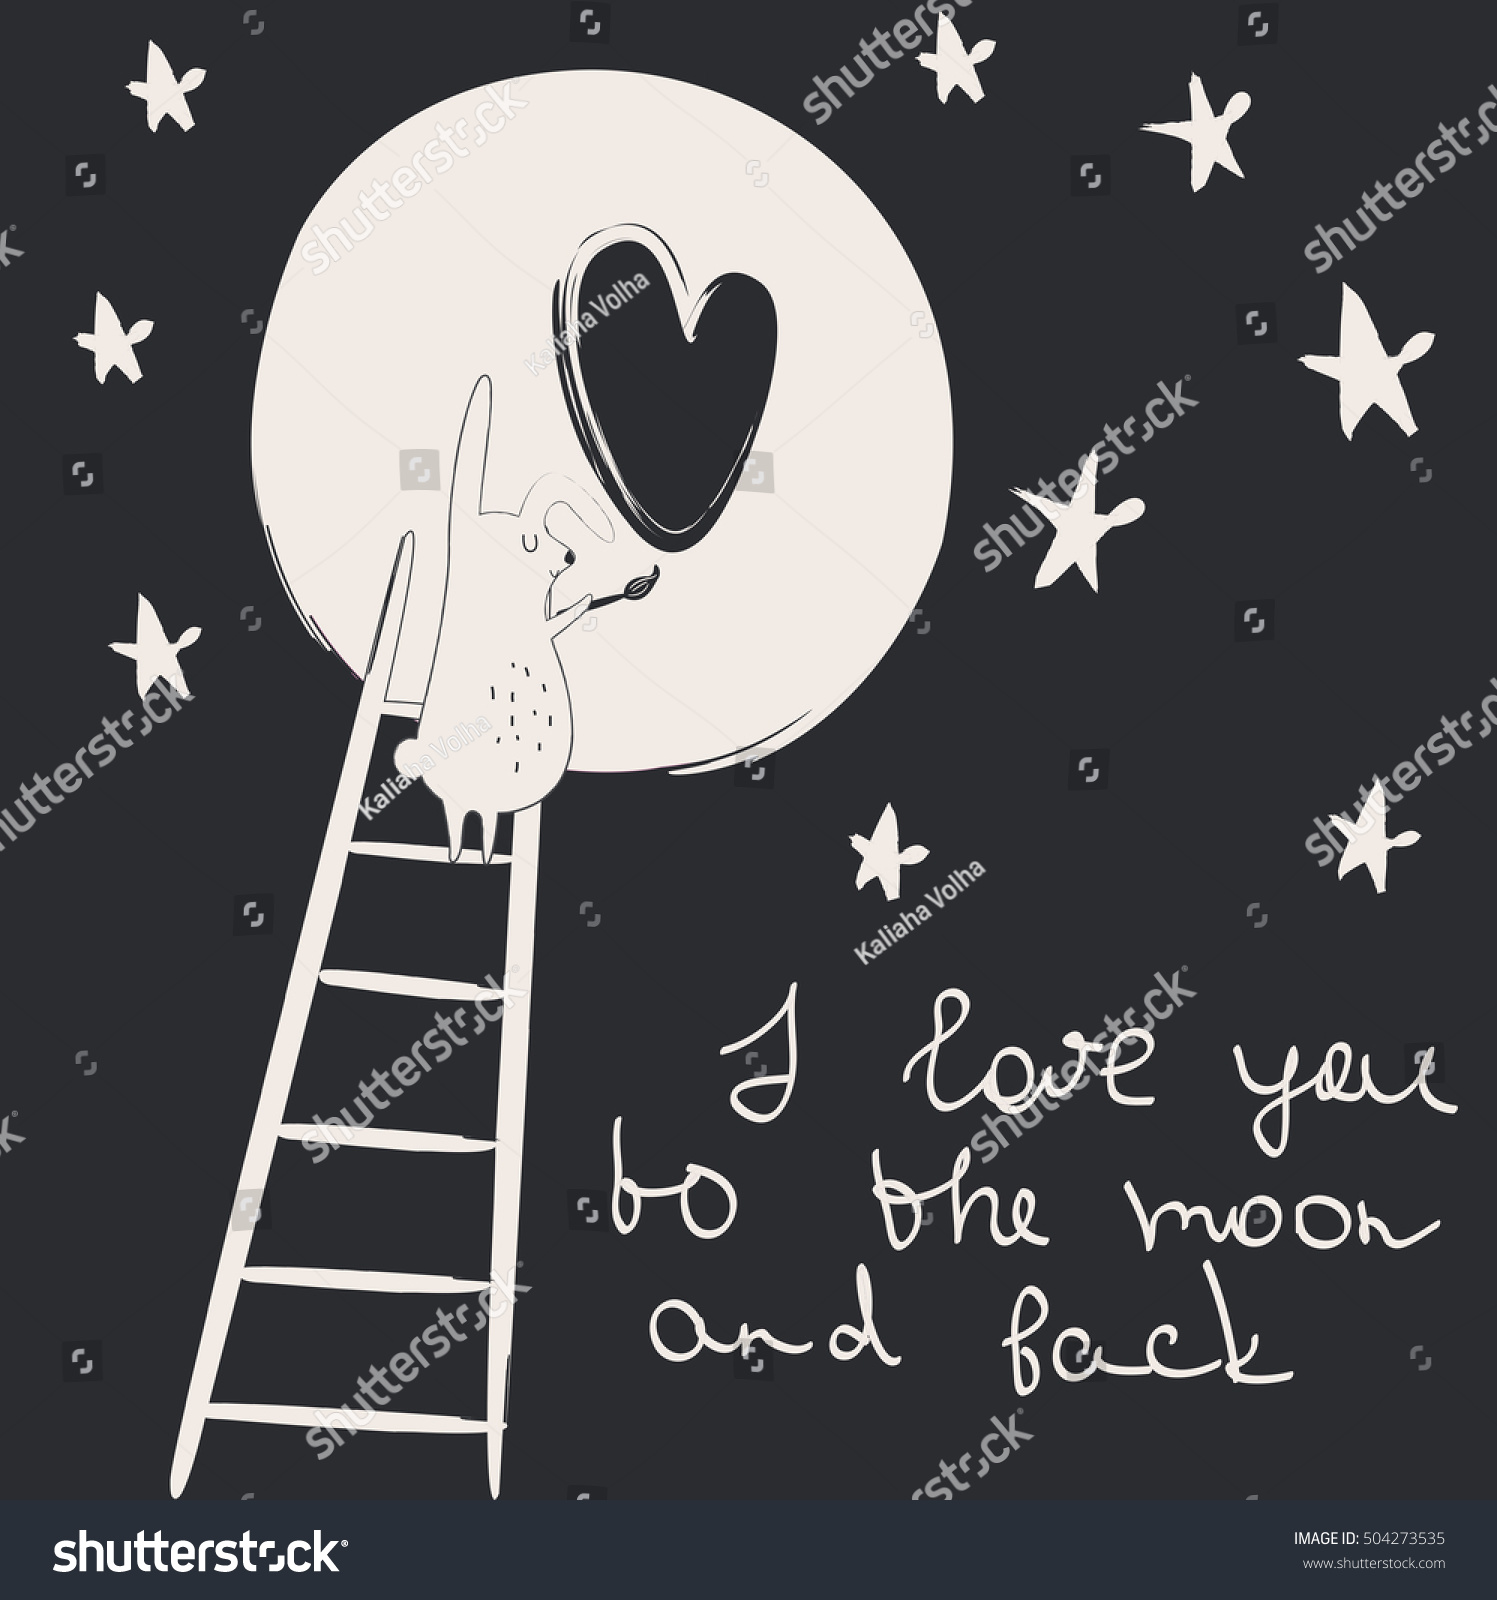 Love You Moon Back Poster Cute Stock Vector Royalty Free